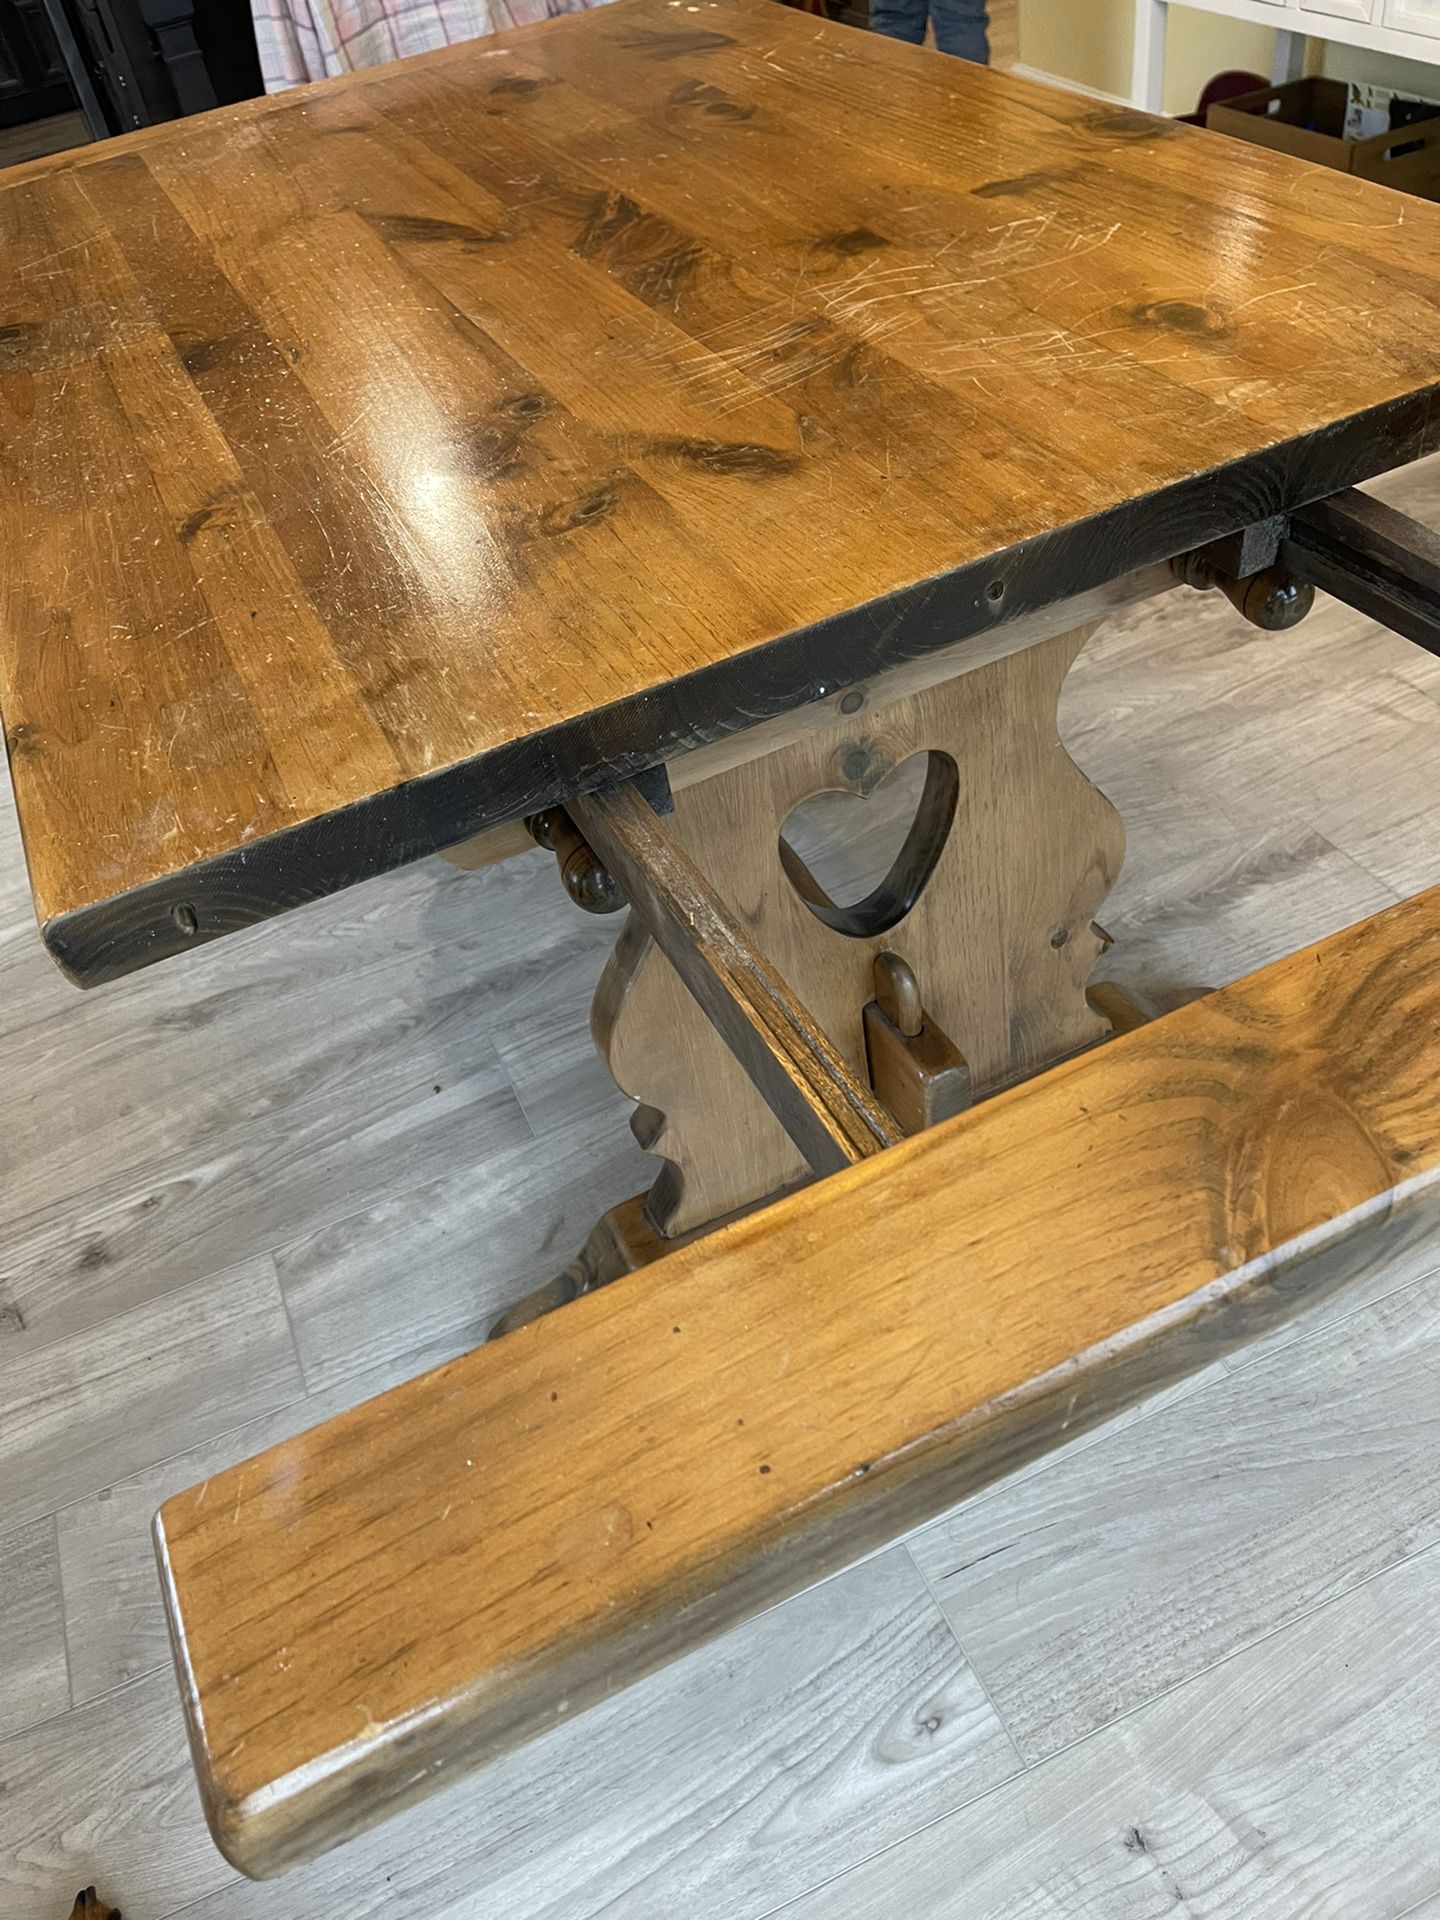 Antique Oak Kitchen Table With Leaves and 4 Chairs